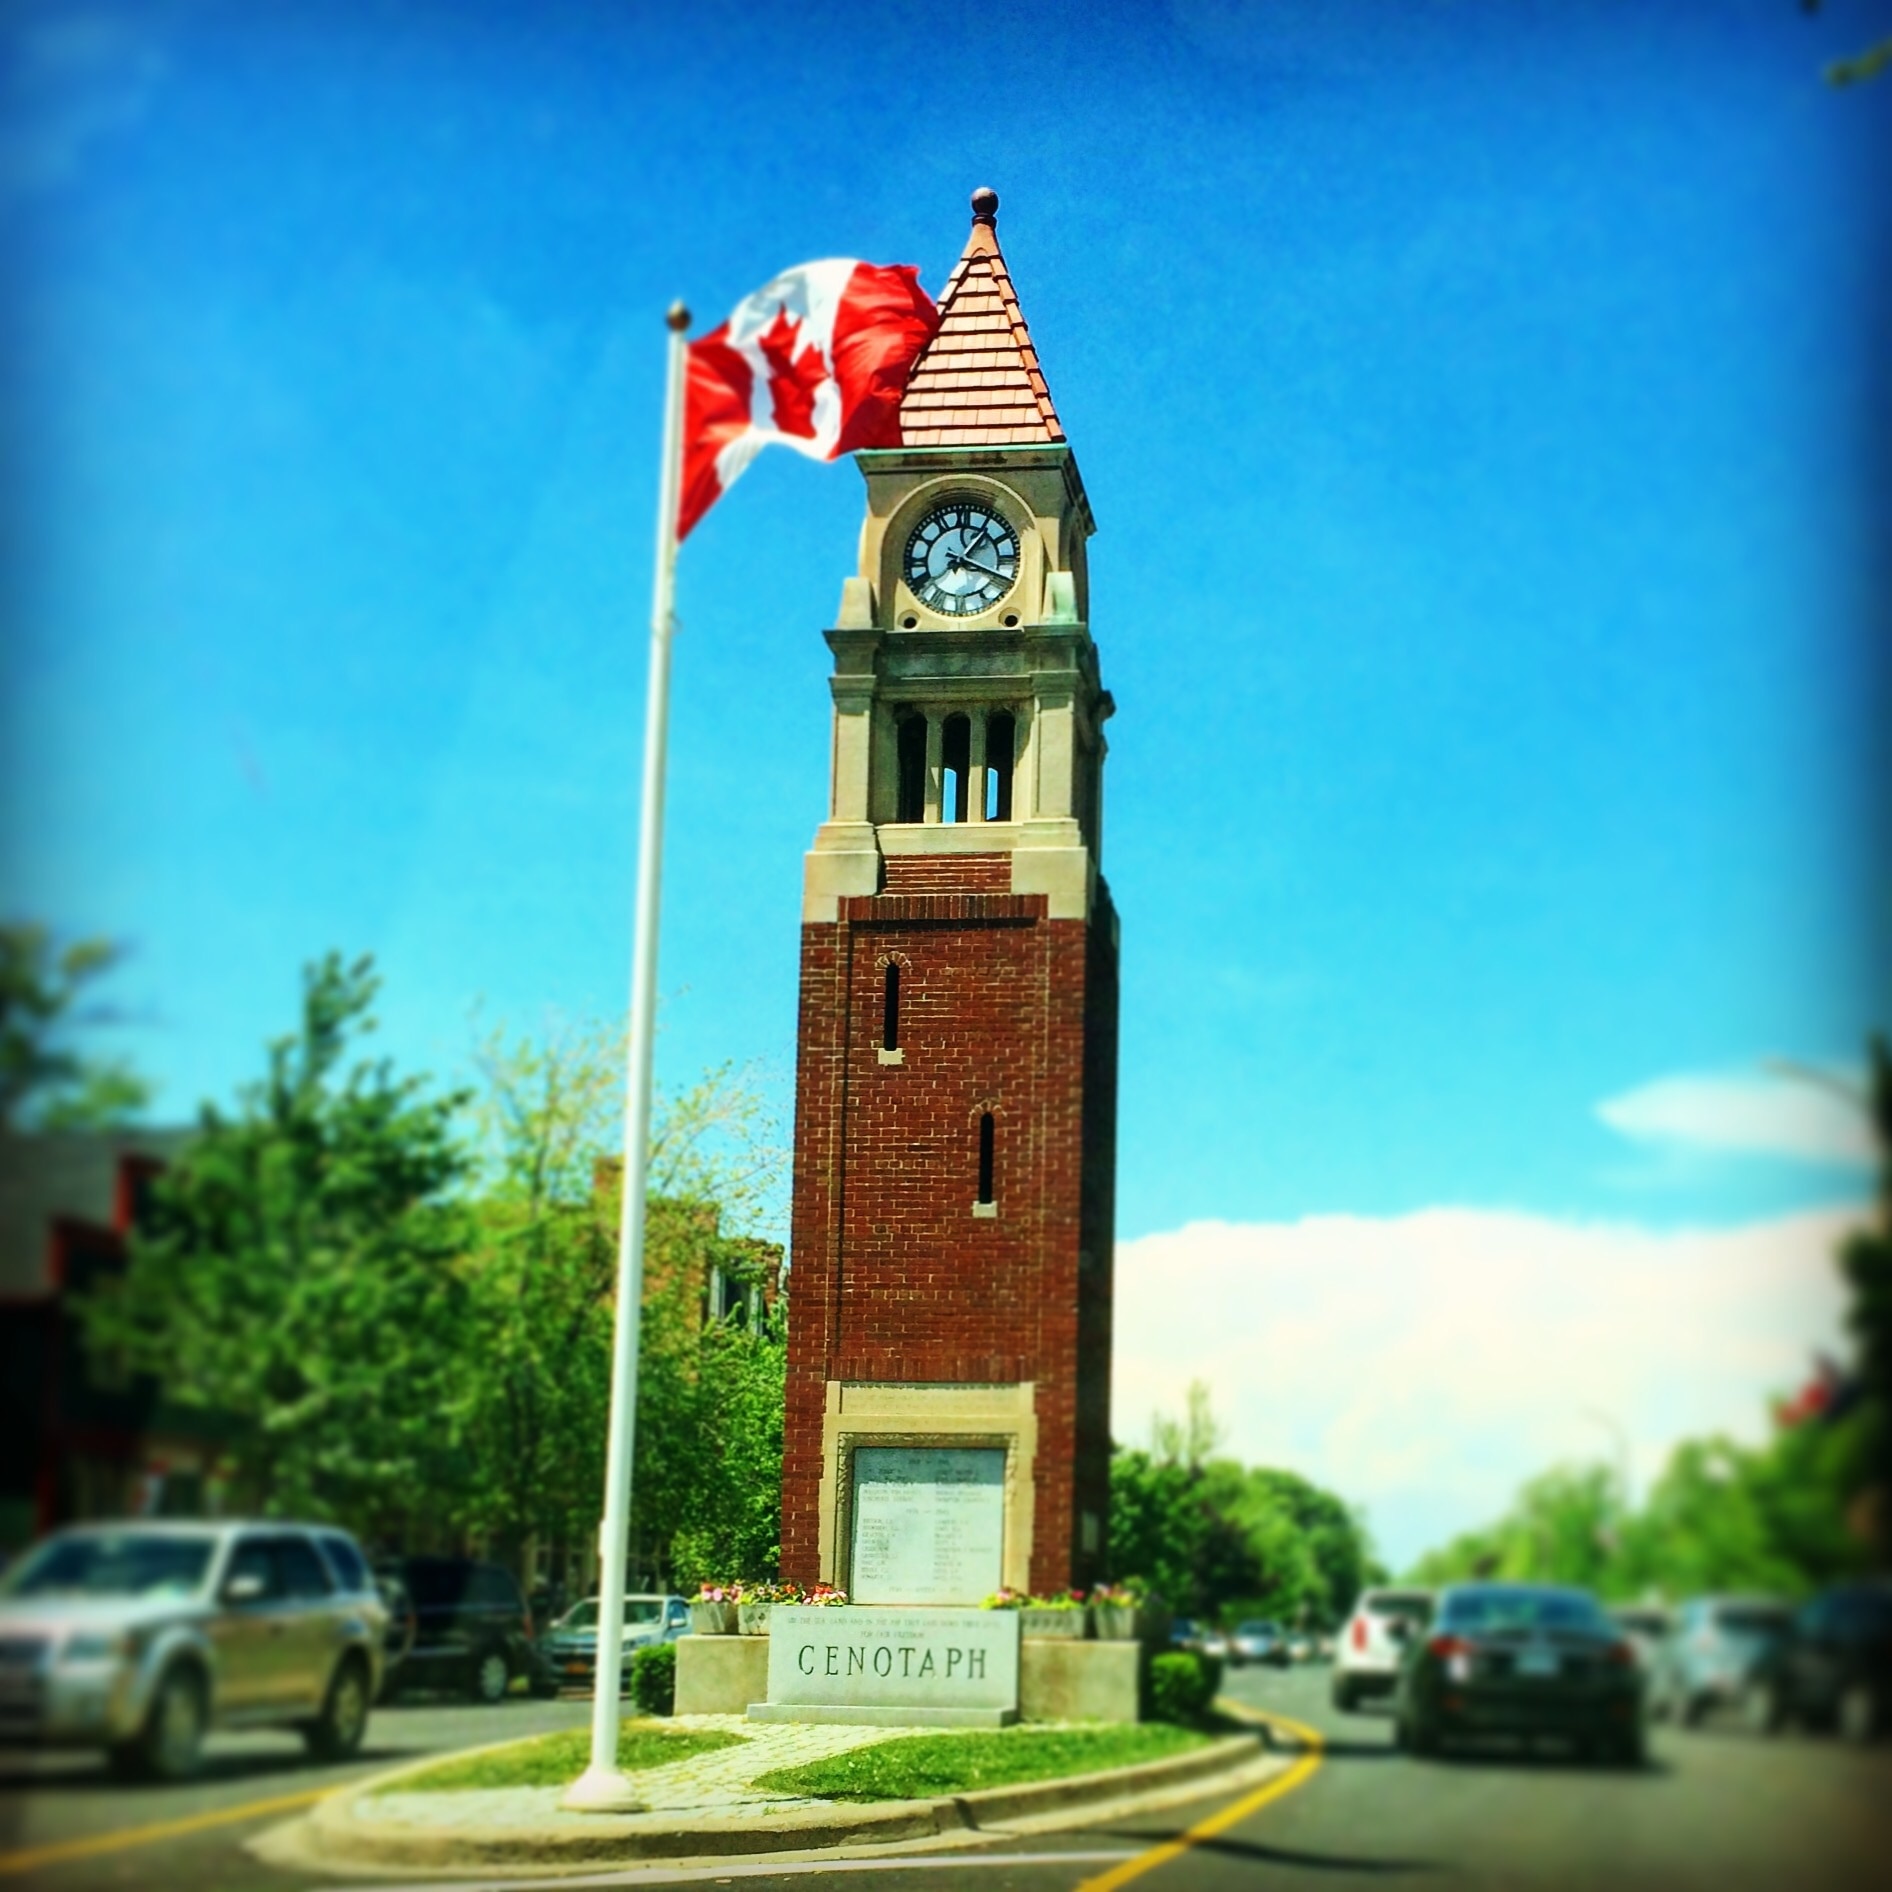 The Niagara-on-the-Lake Memorial Clock Tower - actually a cenotaph erected in 1922 - in the heart of Old Town on Queen Street.